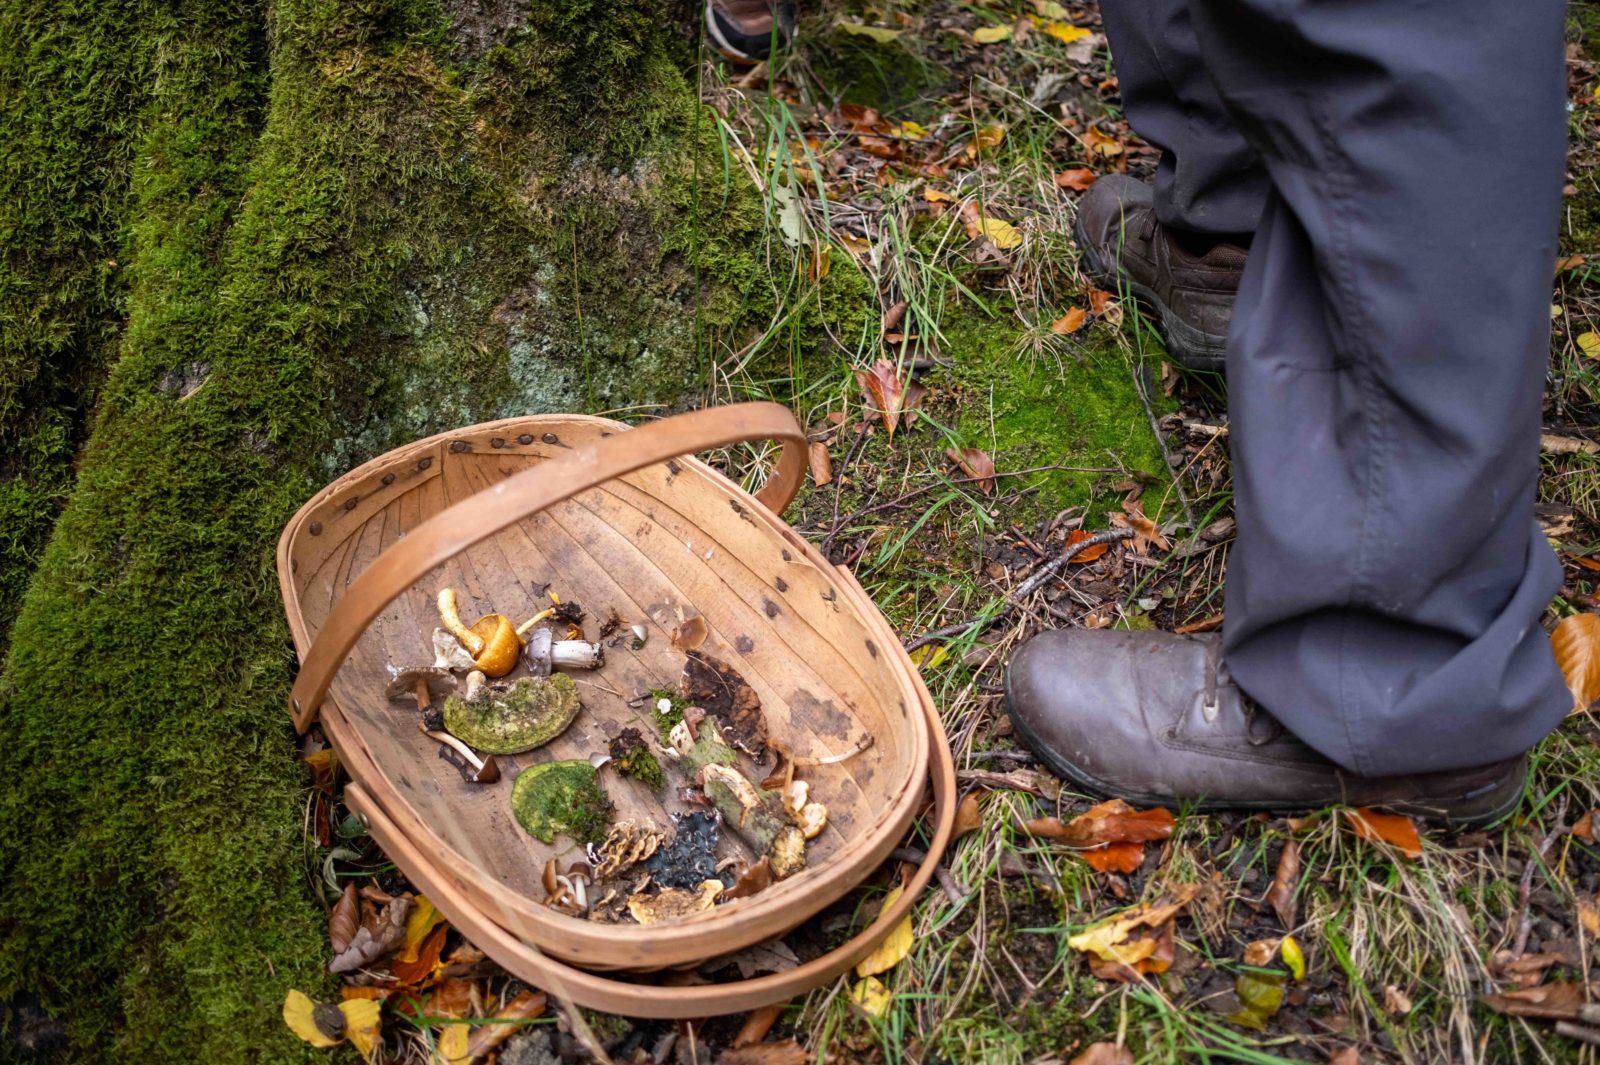 A basket is photographed on the ground of the woods at the stump of a mossy tree. The basket is filled with a variety of mushrooms.